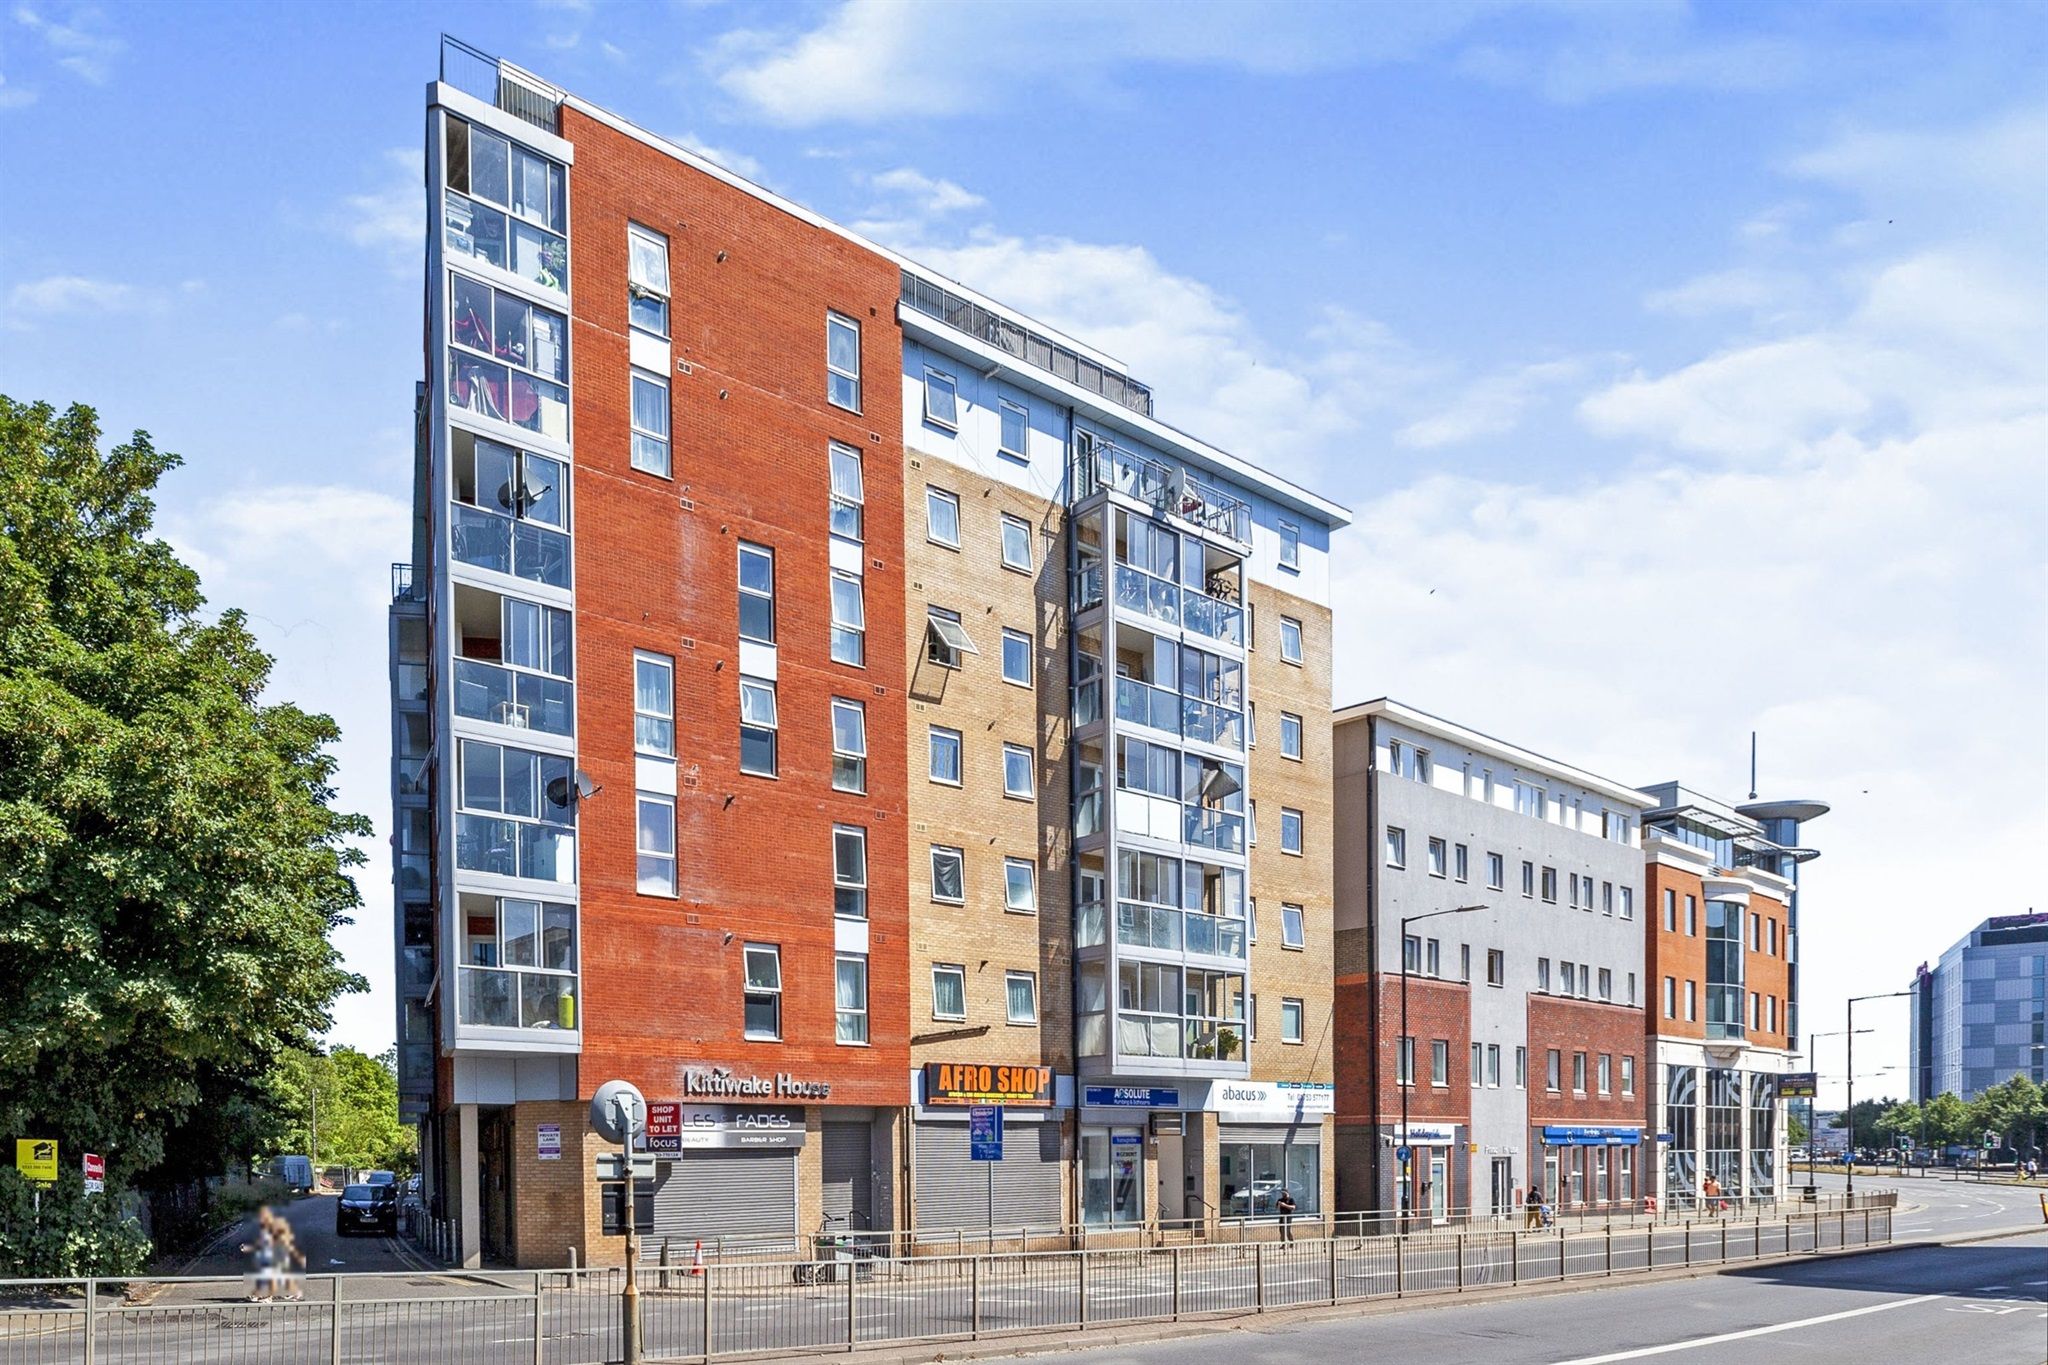 2 bed flat for sale in High Street, Slough SL1 - Zoopla